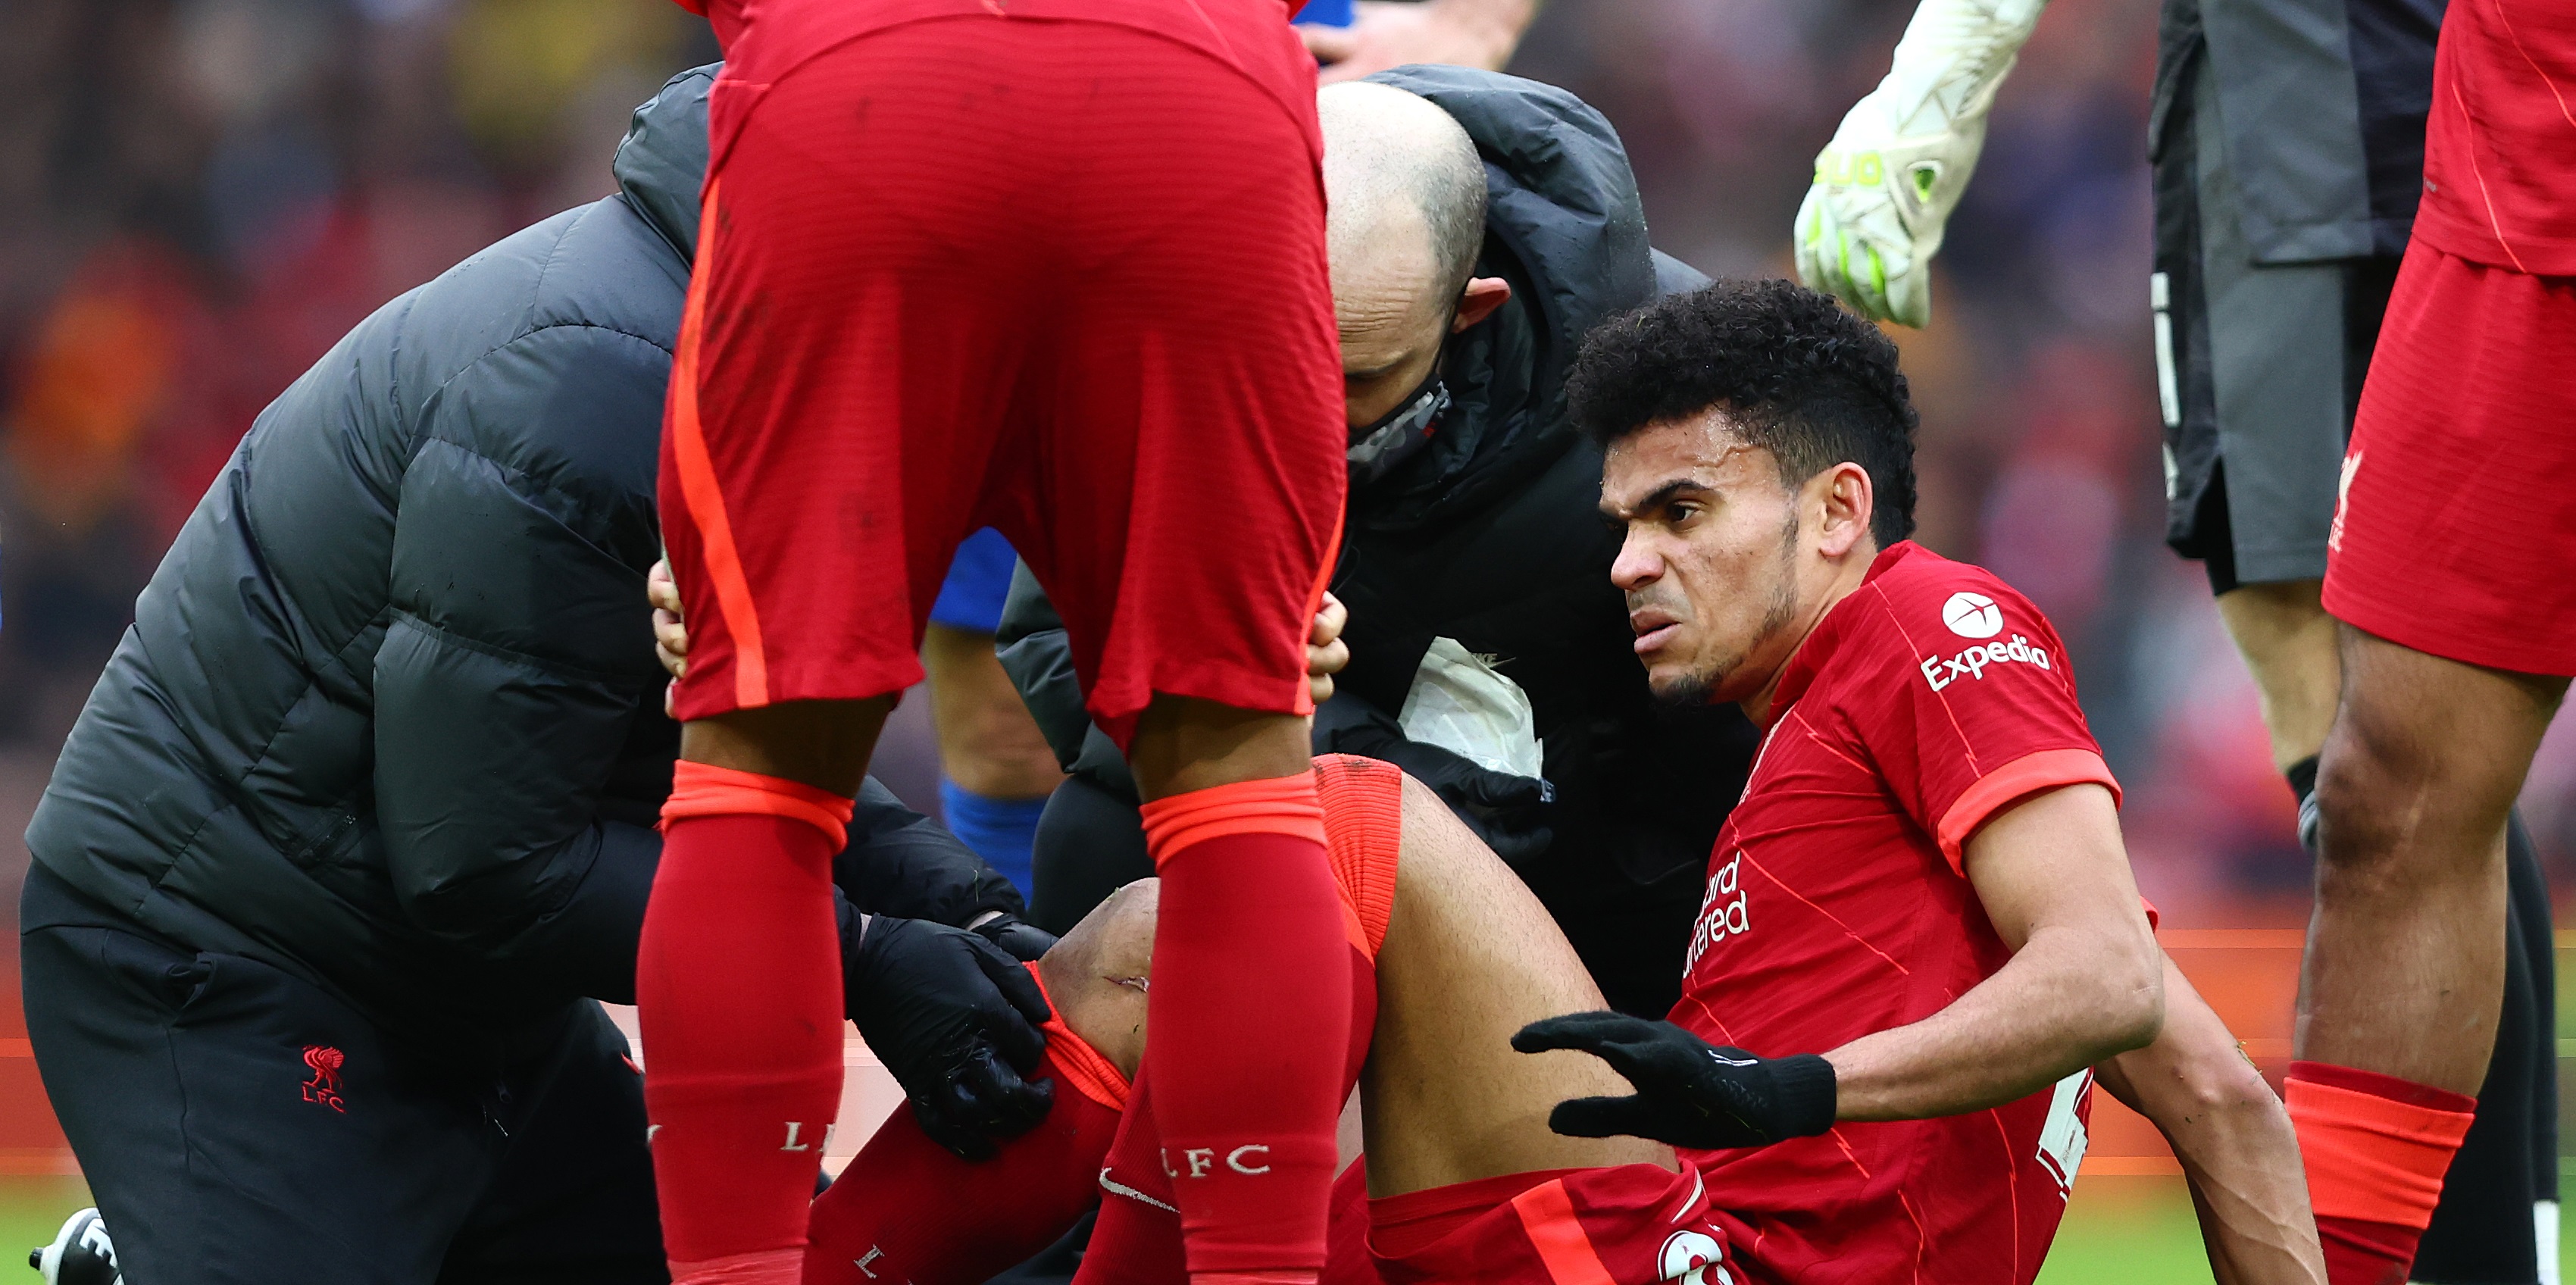 Luis Diaz has one clear flaw he needs to improve on, notes Colombian reporter – Klopp spotted it against Cardiff City